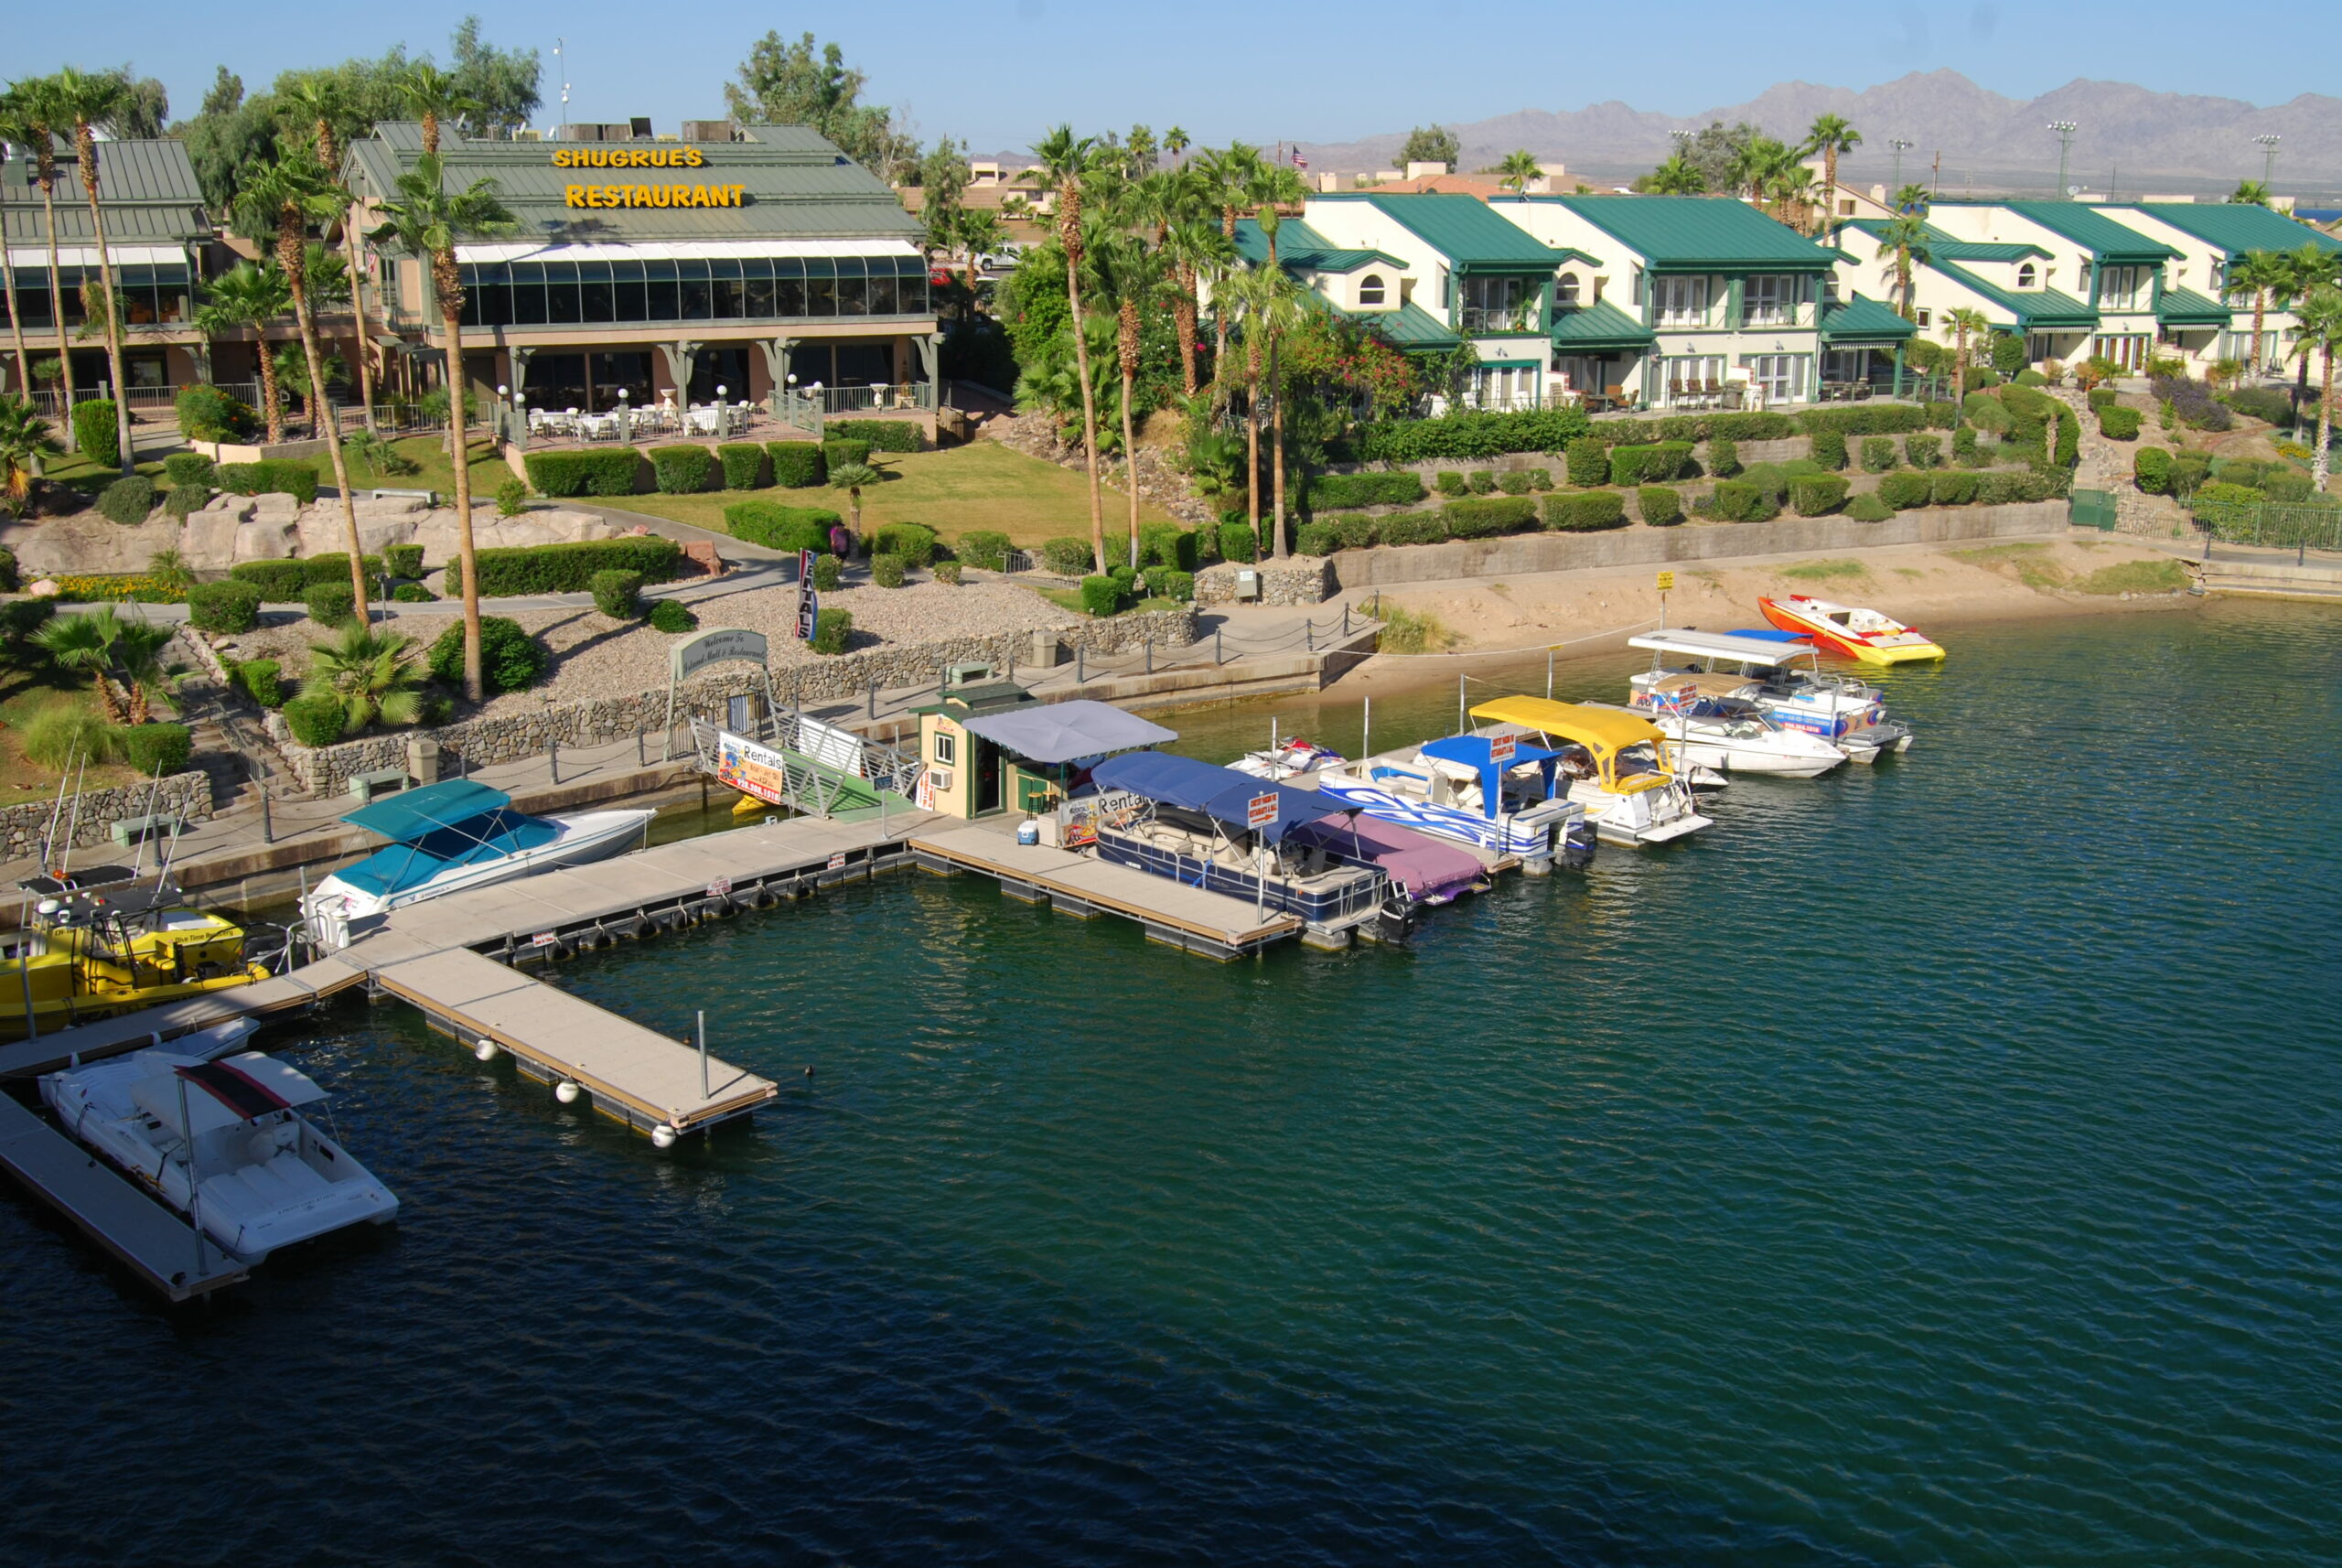 Overview of a marina with Titan Deck marine decking on dock.